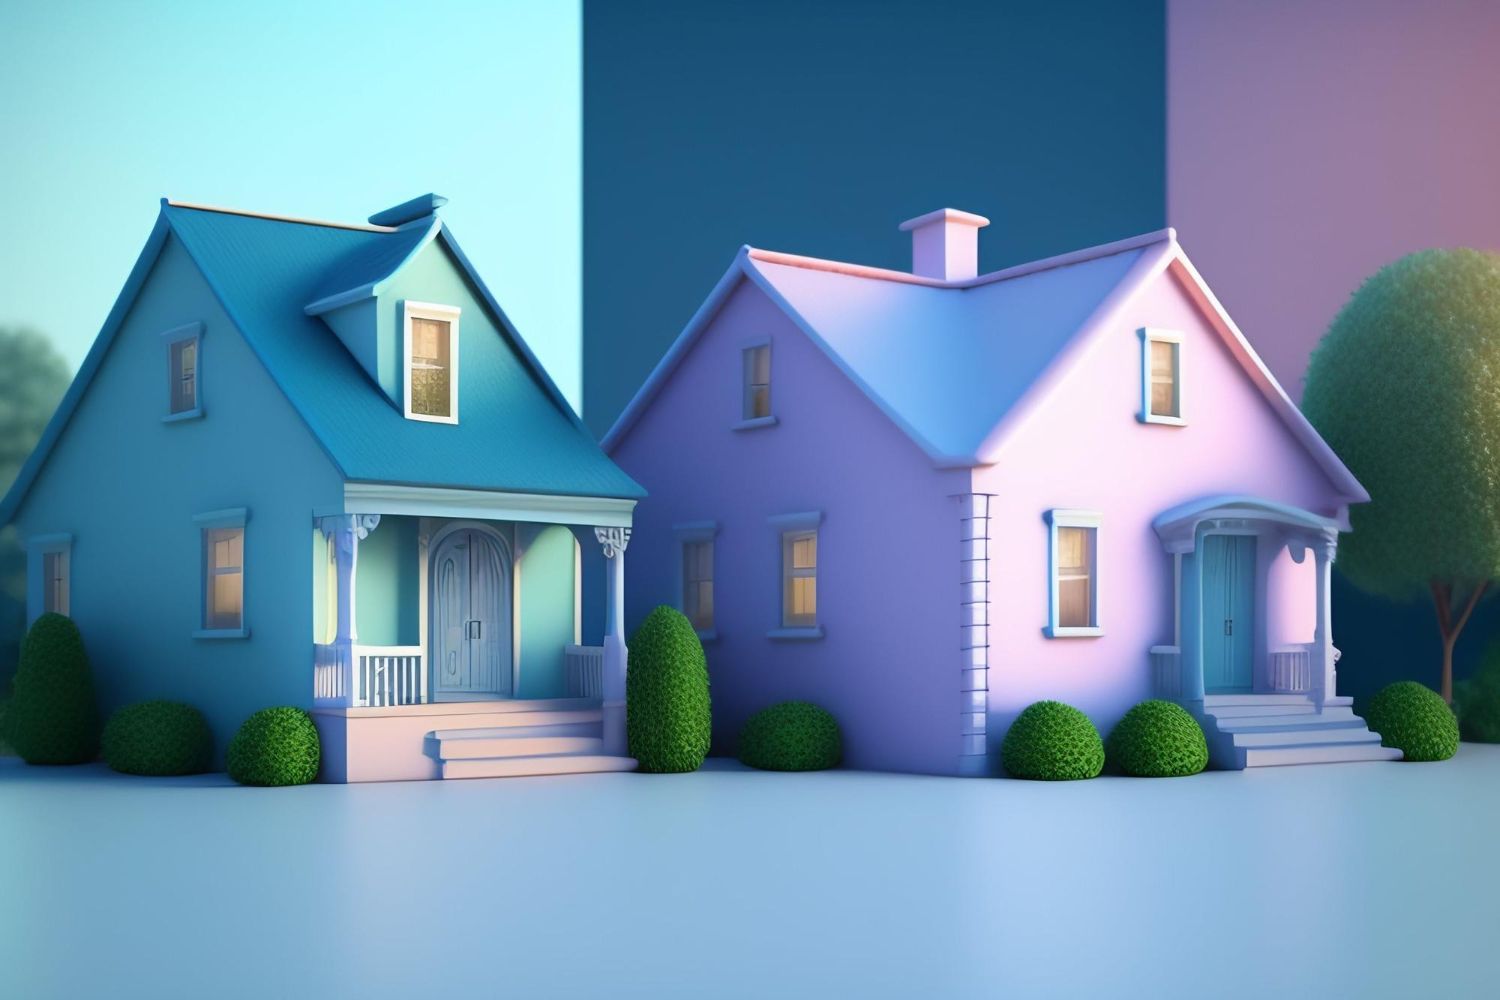 set-houses-with-blue-roof-blue-house-with-pink-roof